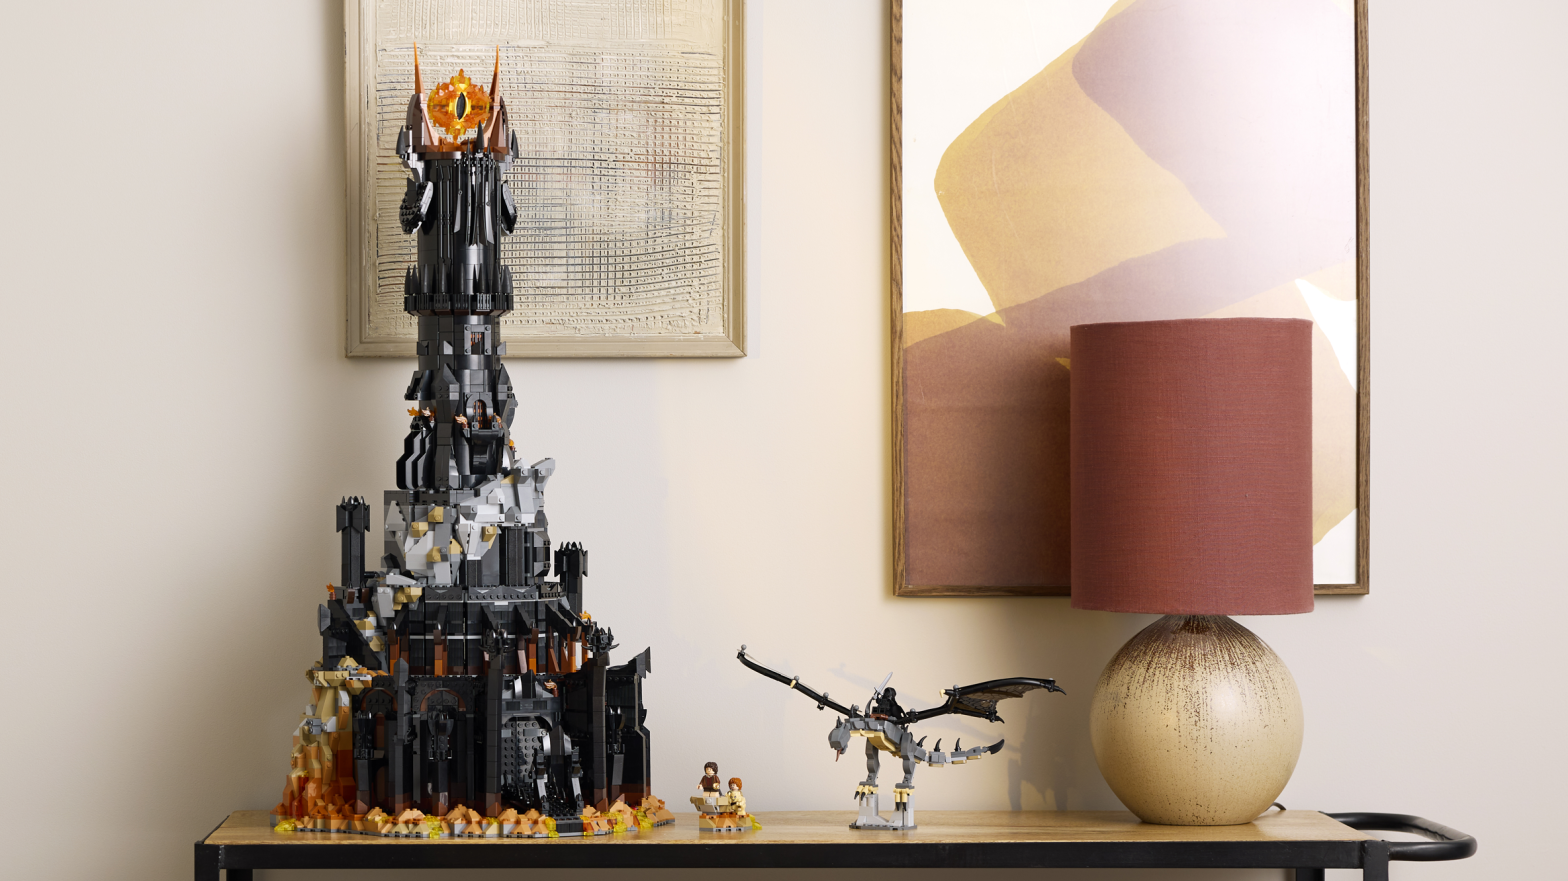 Lego’s Lord of the Rings Barad-Dûr Set Will Cast an Evil Eye Over Your Domain